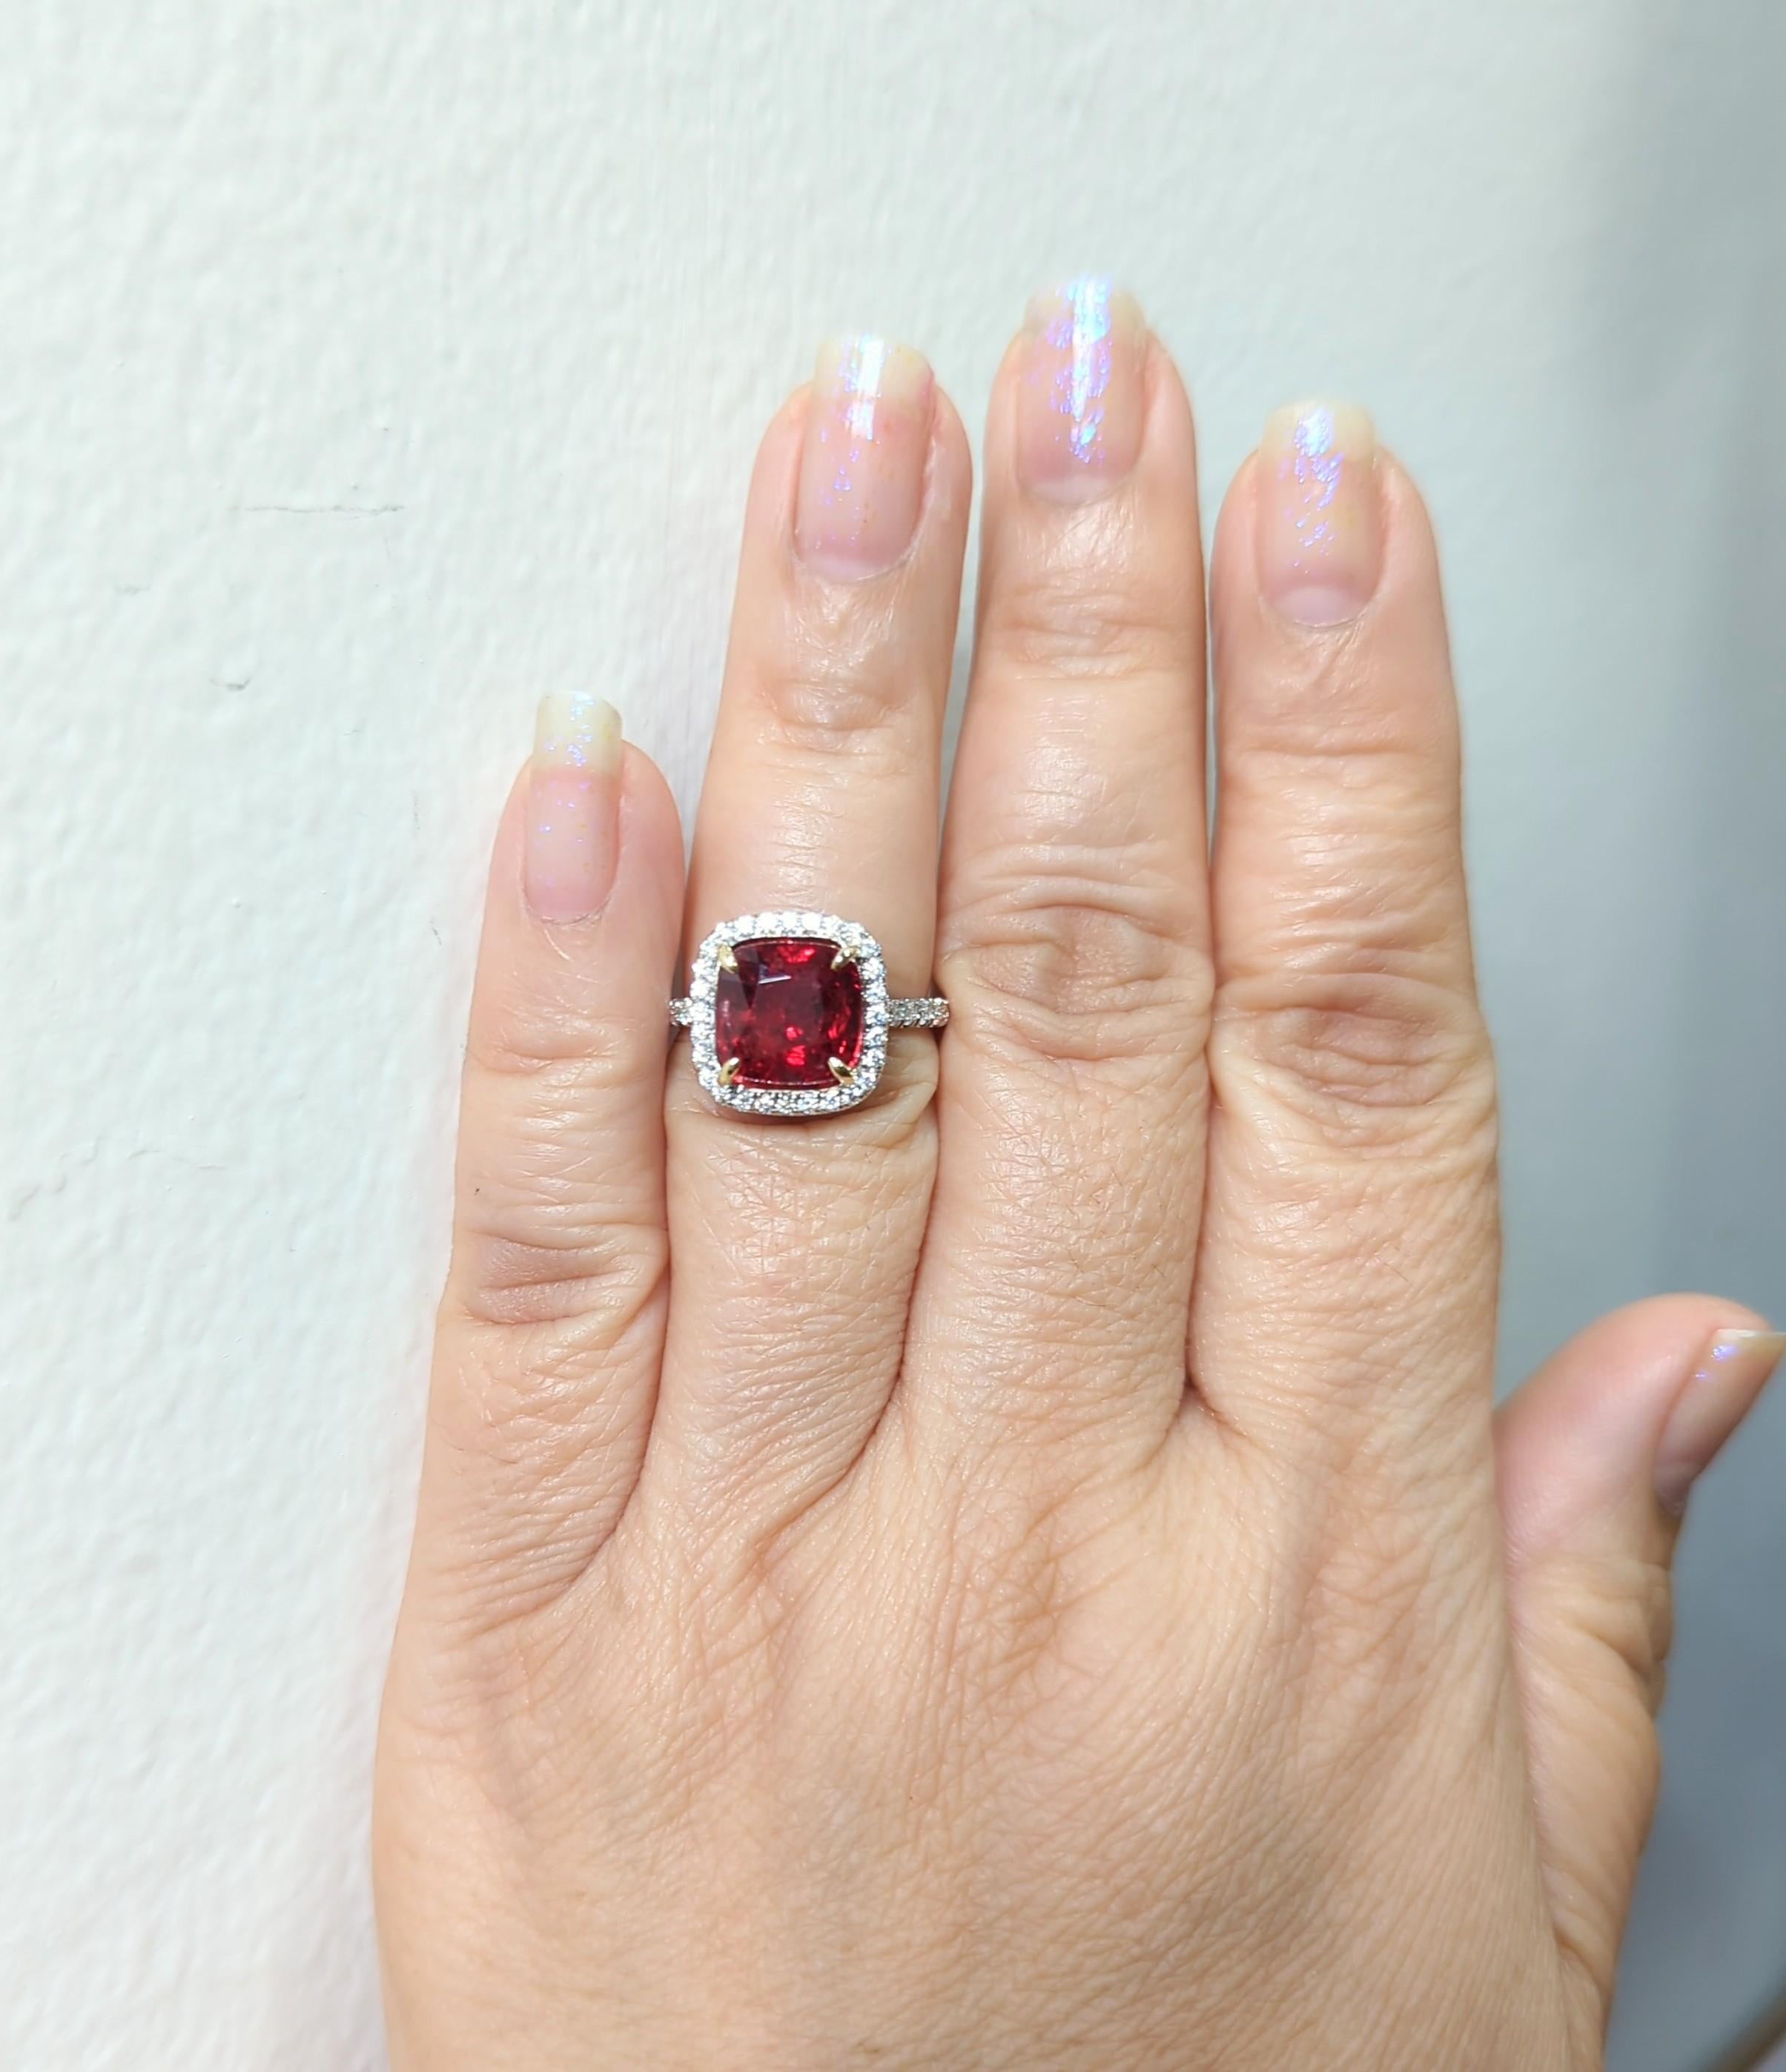 Gorgeous 5.06 ct. unheated vivid red spinel square cushion with good quality, white, and bright diamond rounds.  Handmade in 18k white and yellow gold.  EG Lab certificate included.  Ring size 6.5.